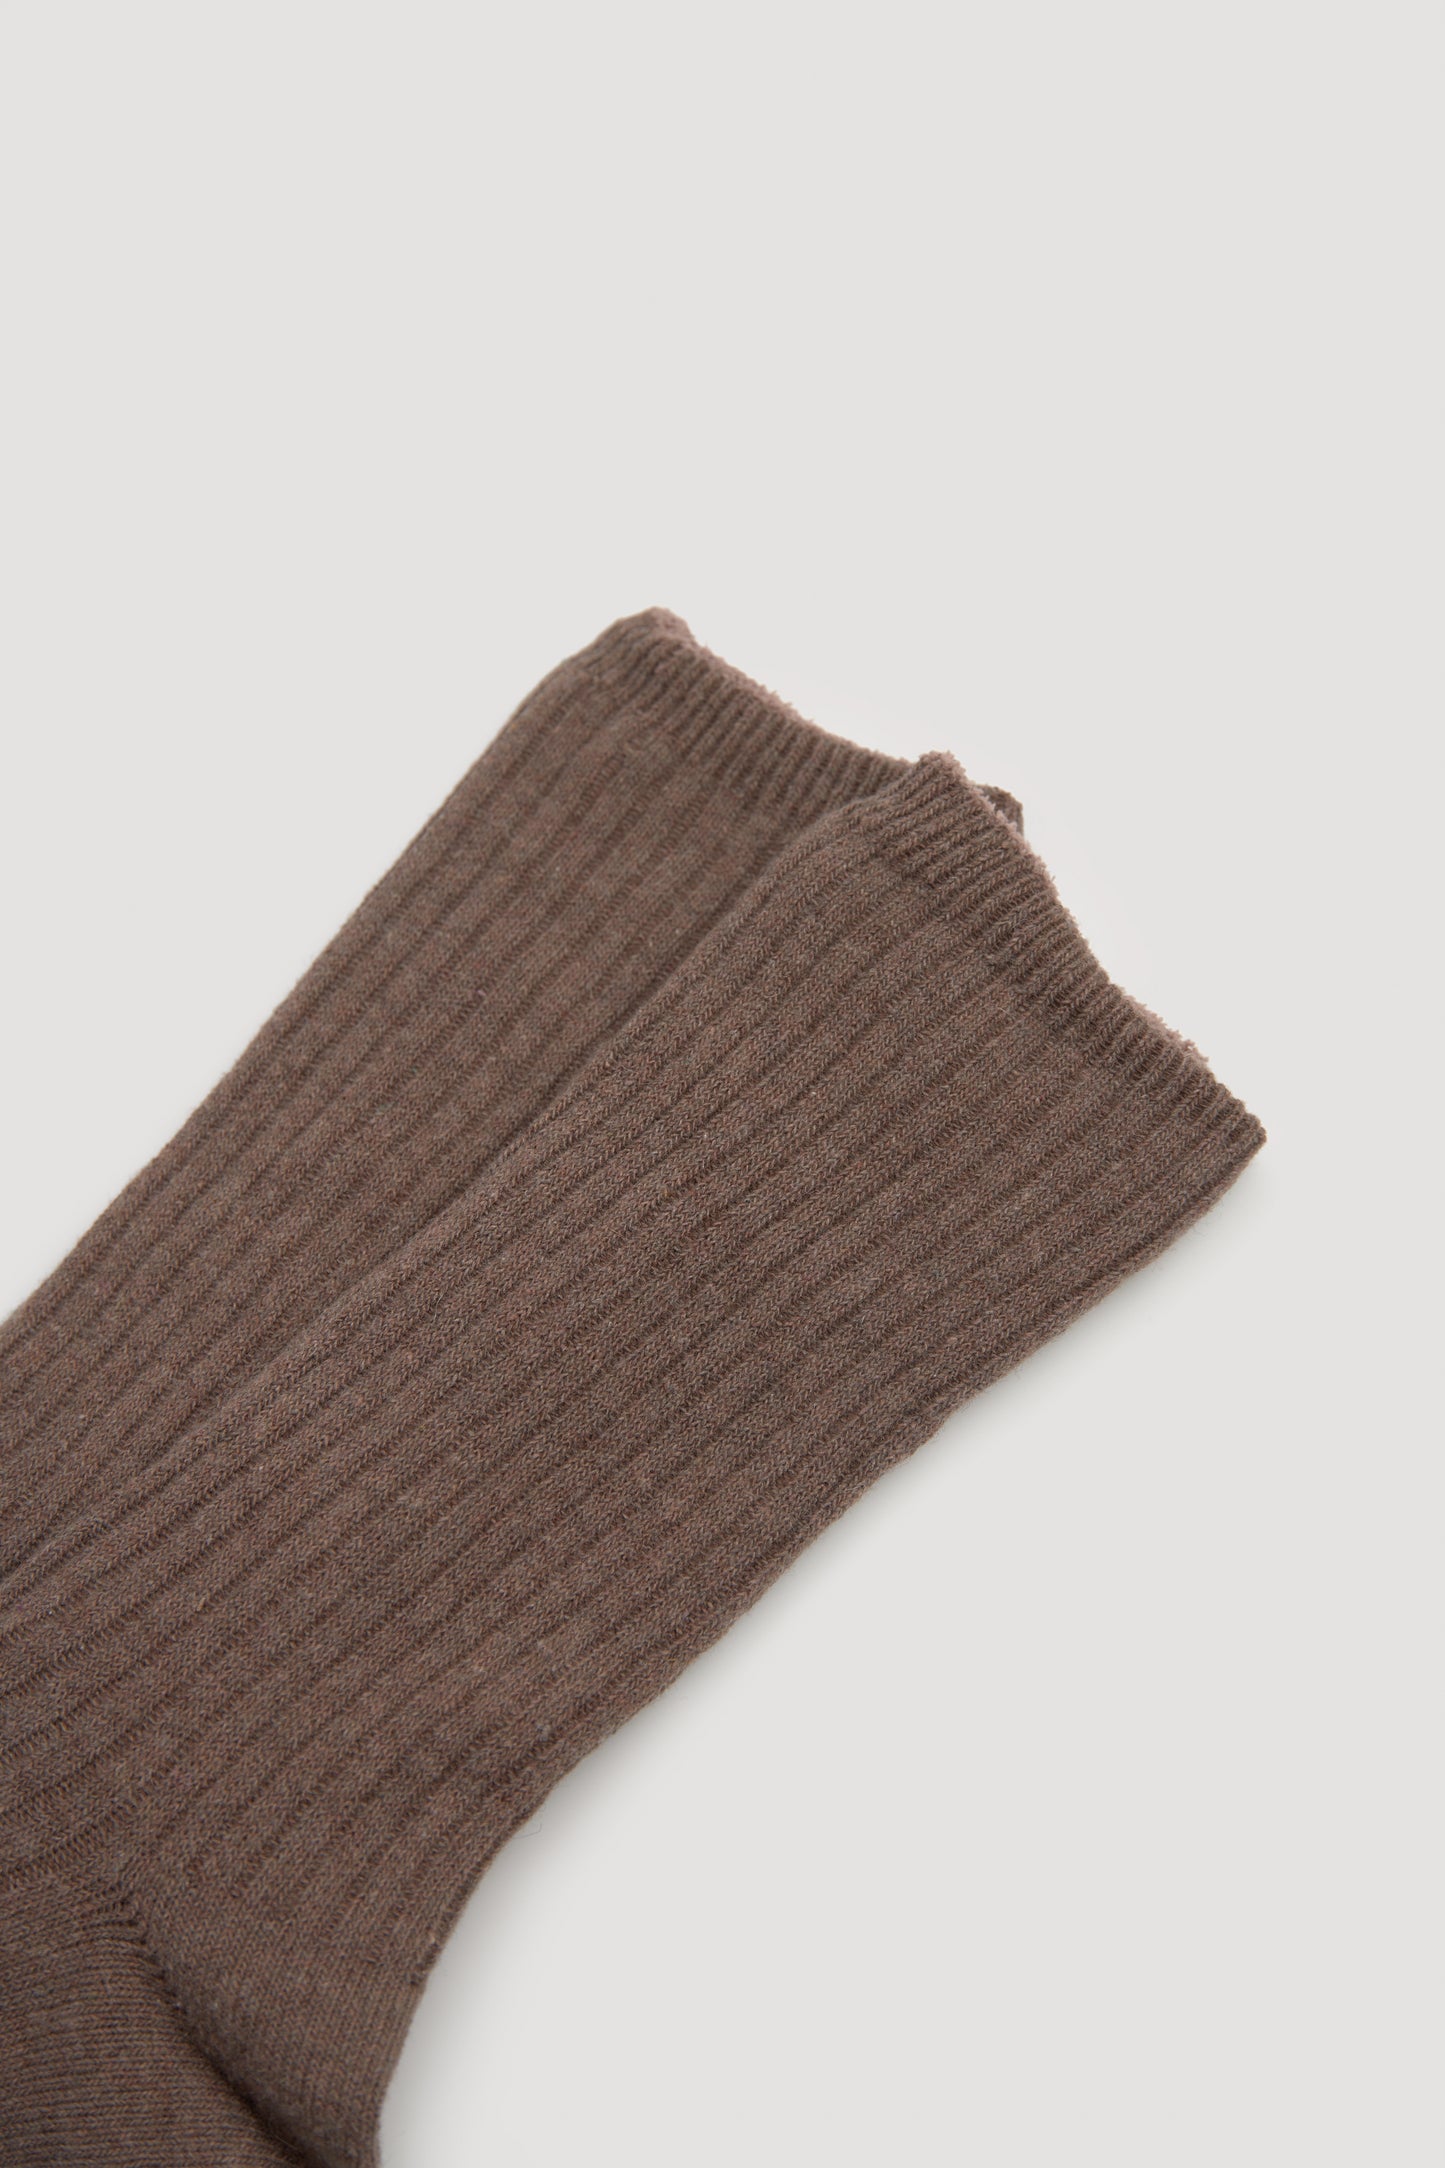 Ysabel Mora Double Sock - Light brown soft and warm fleece lined knitted ribbed socks with soft top cuff.